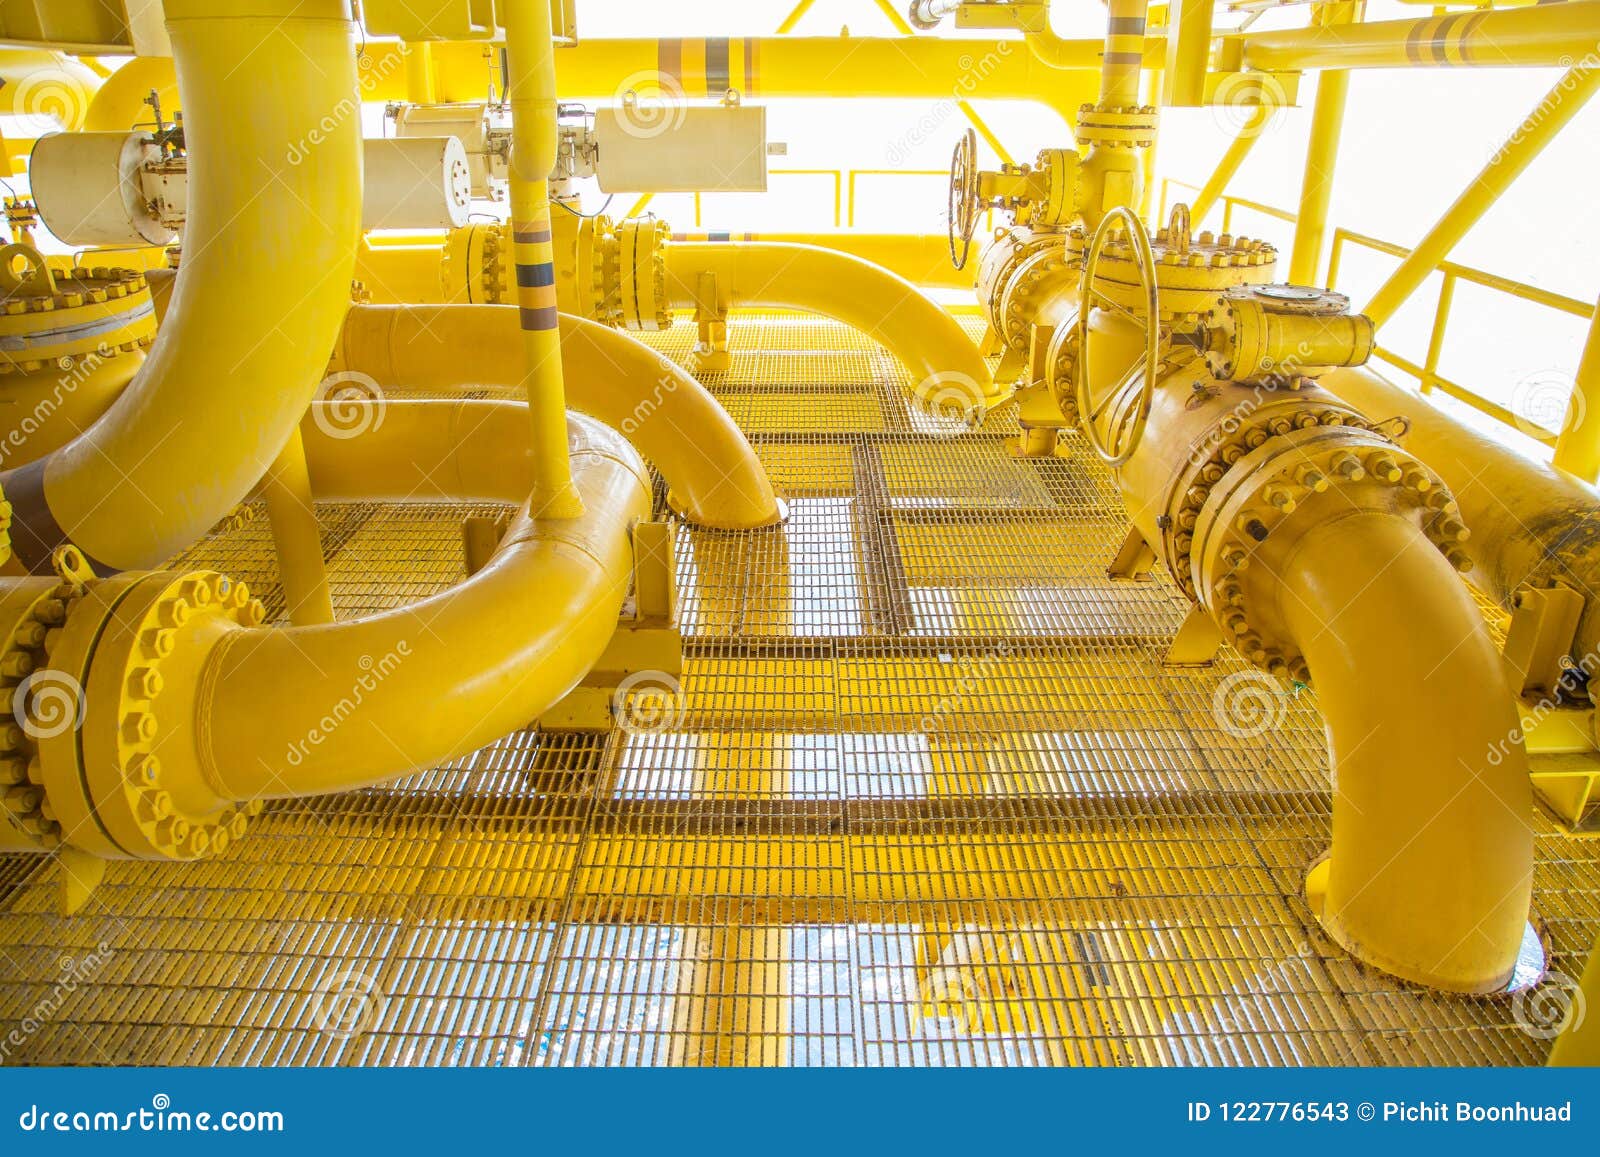 offshore oil and gas remote platform, piping system and shutdown valve on platform.